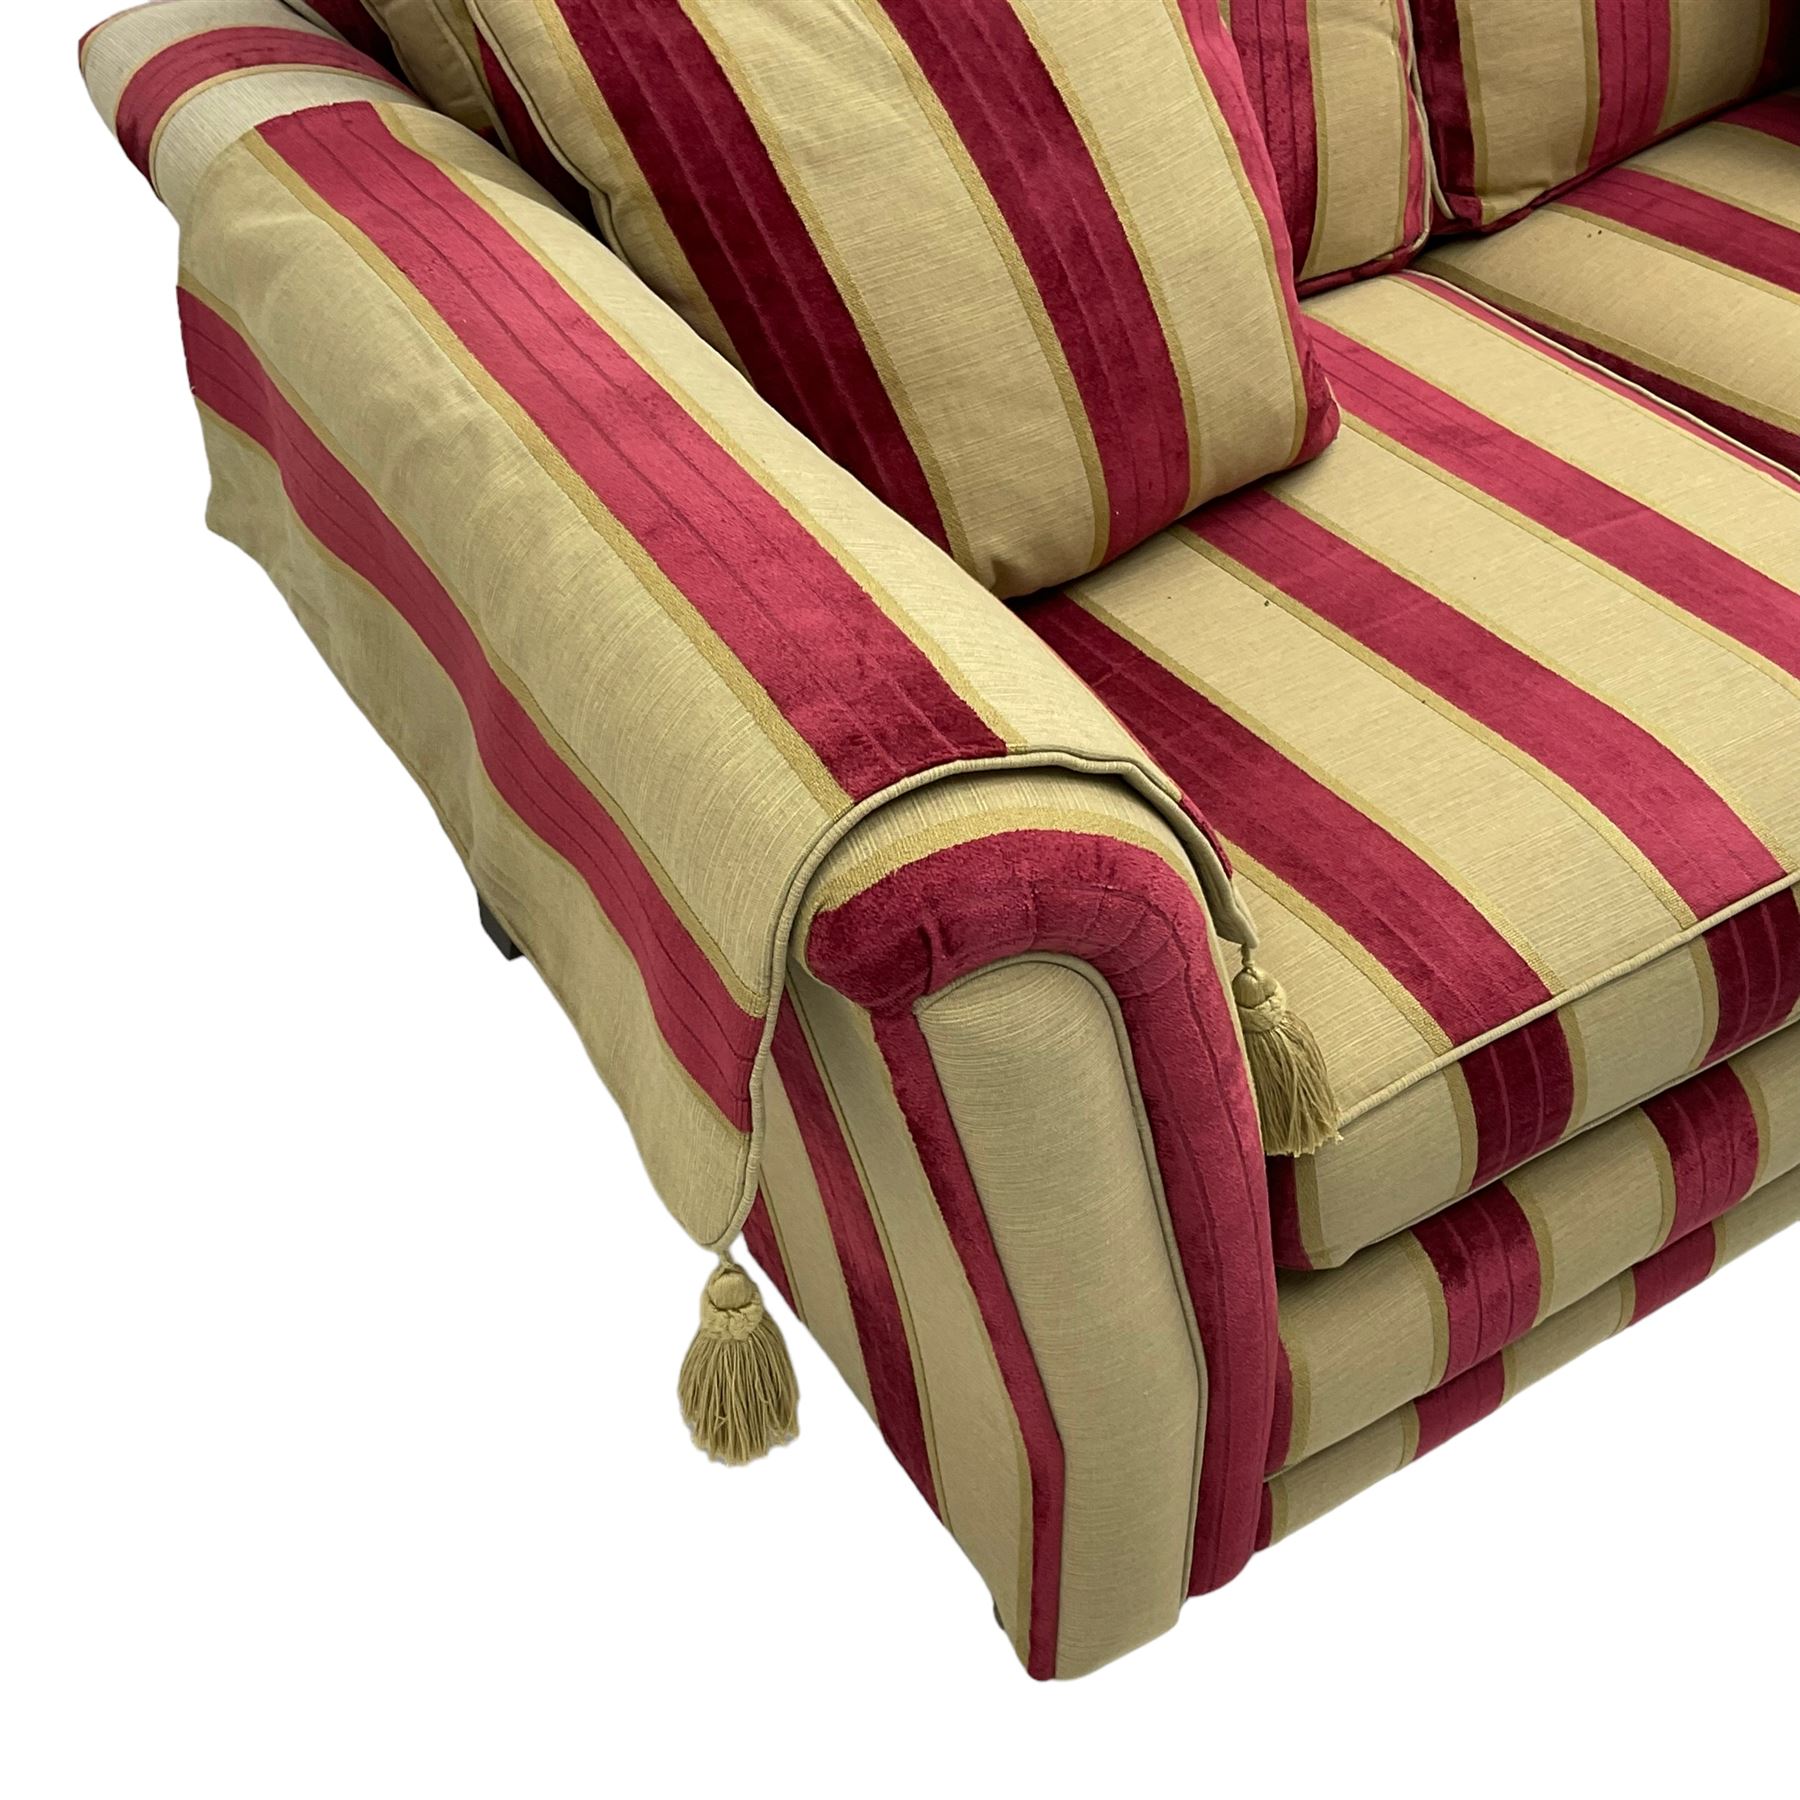 Three-piece lounge suite - large two-seat sofa upholstered in red and gold striped fabric (W185cm - Bild 20 aus 24